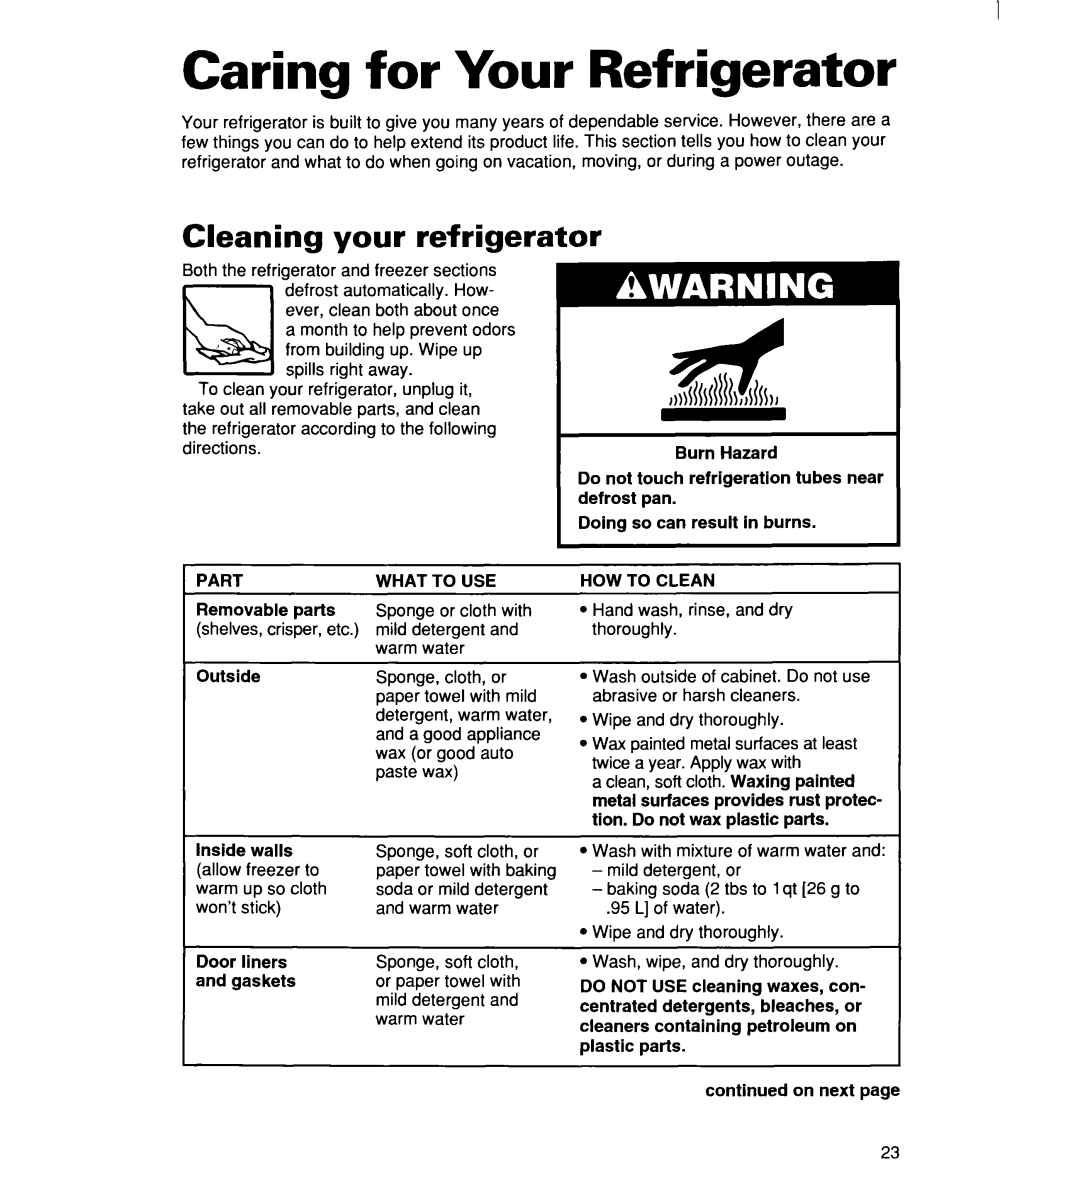 Whirlpool 2194182 warranty Caring for Your Refrigerator, Cleaning your refrigerator 